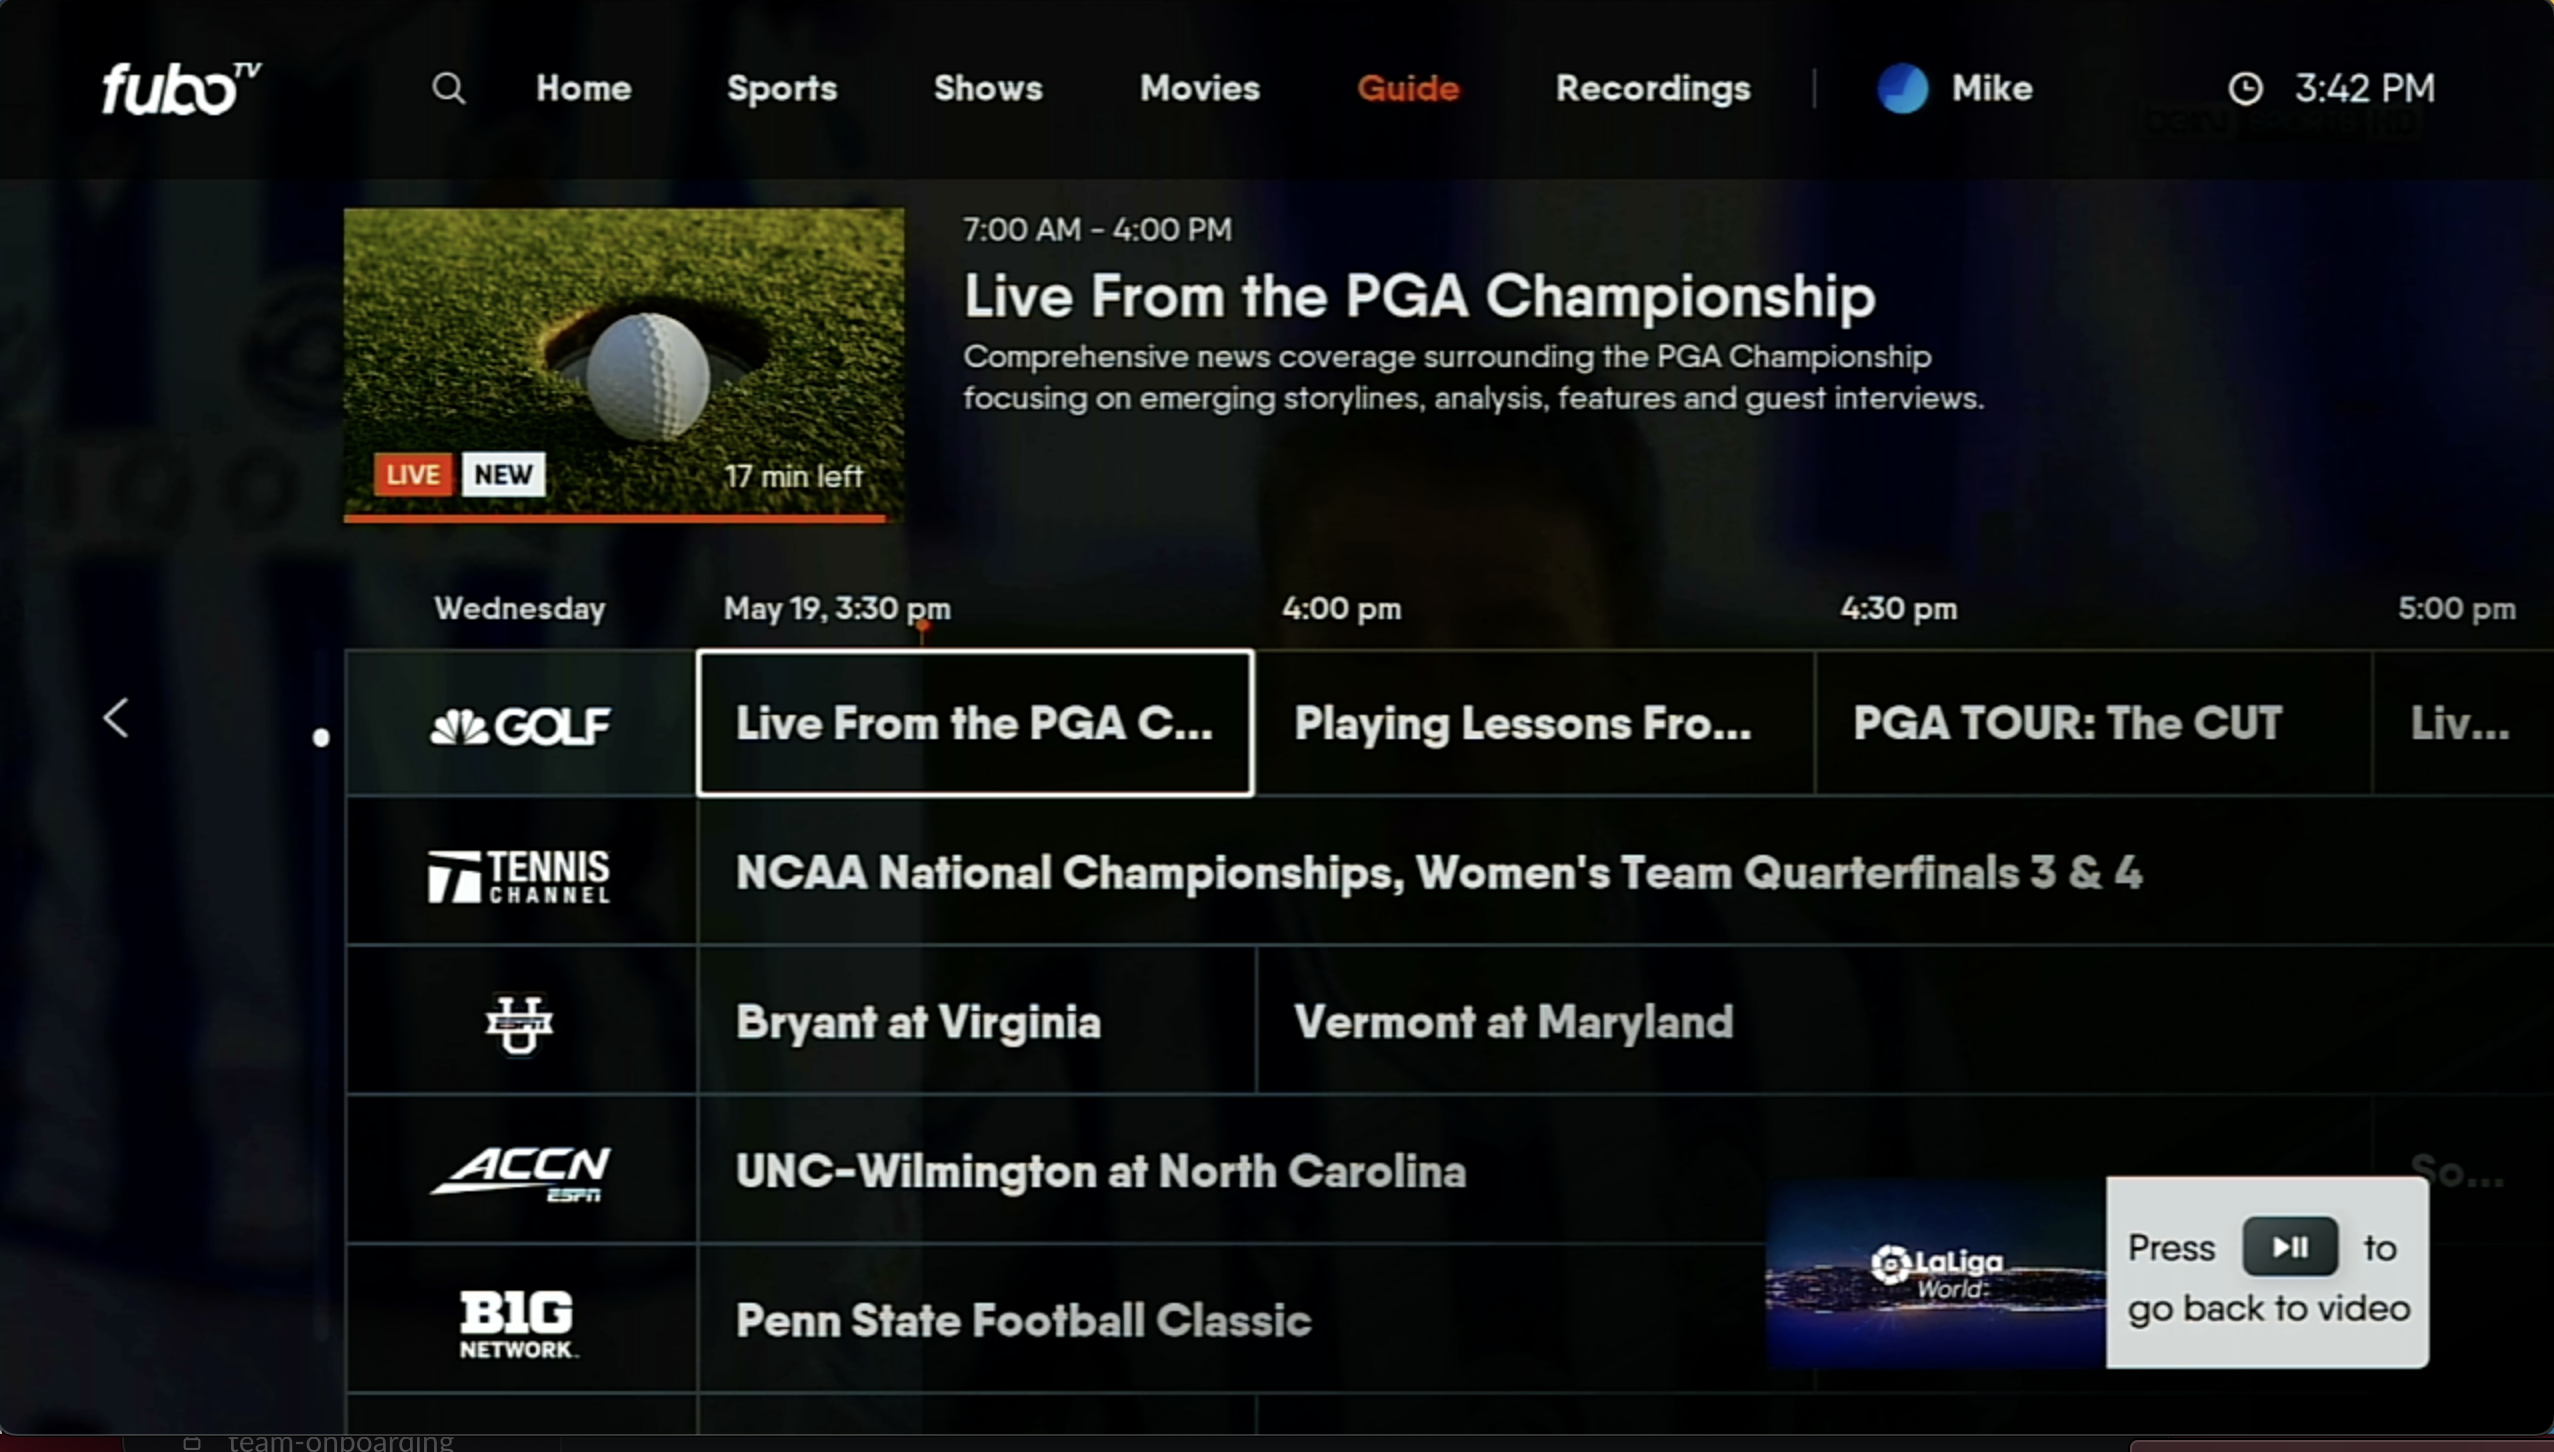 GUIDE screen of the FuboTV app on Roku with SPORTS channel filter selected